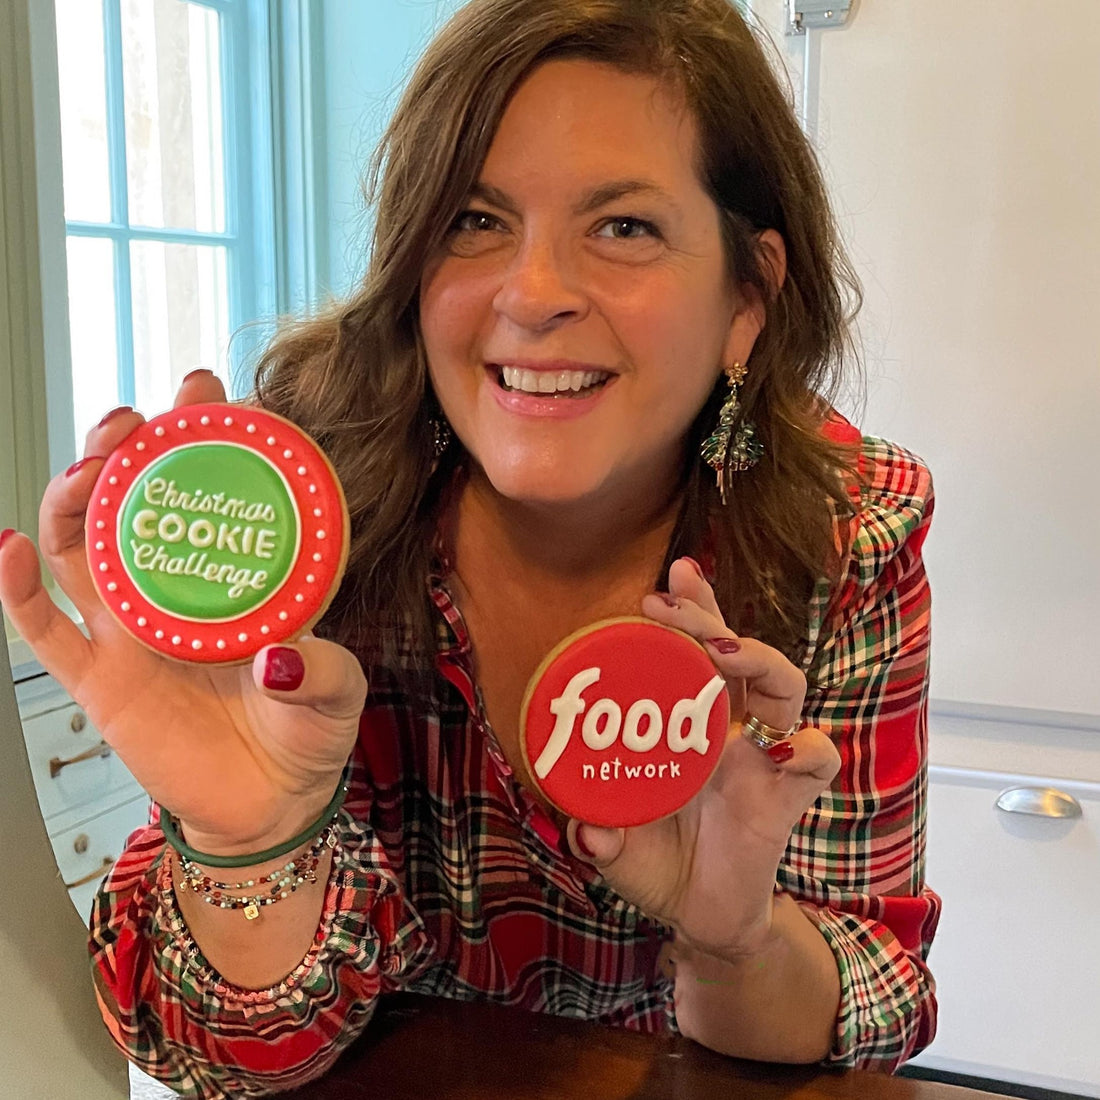 5 reasons I loved being on the Food Network Christmas Cookie Challenge